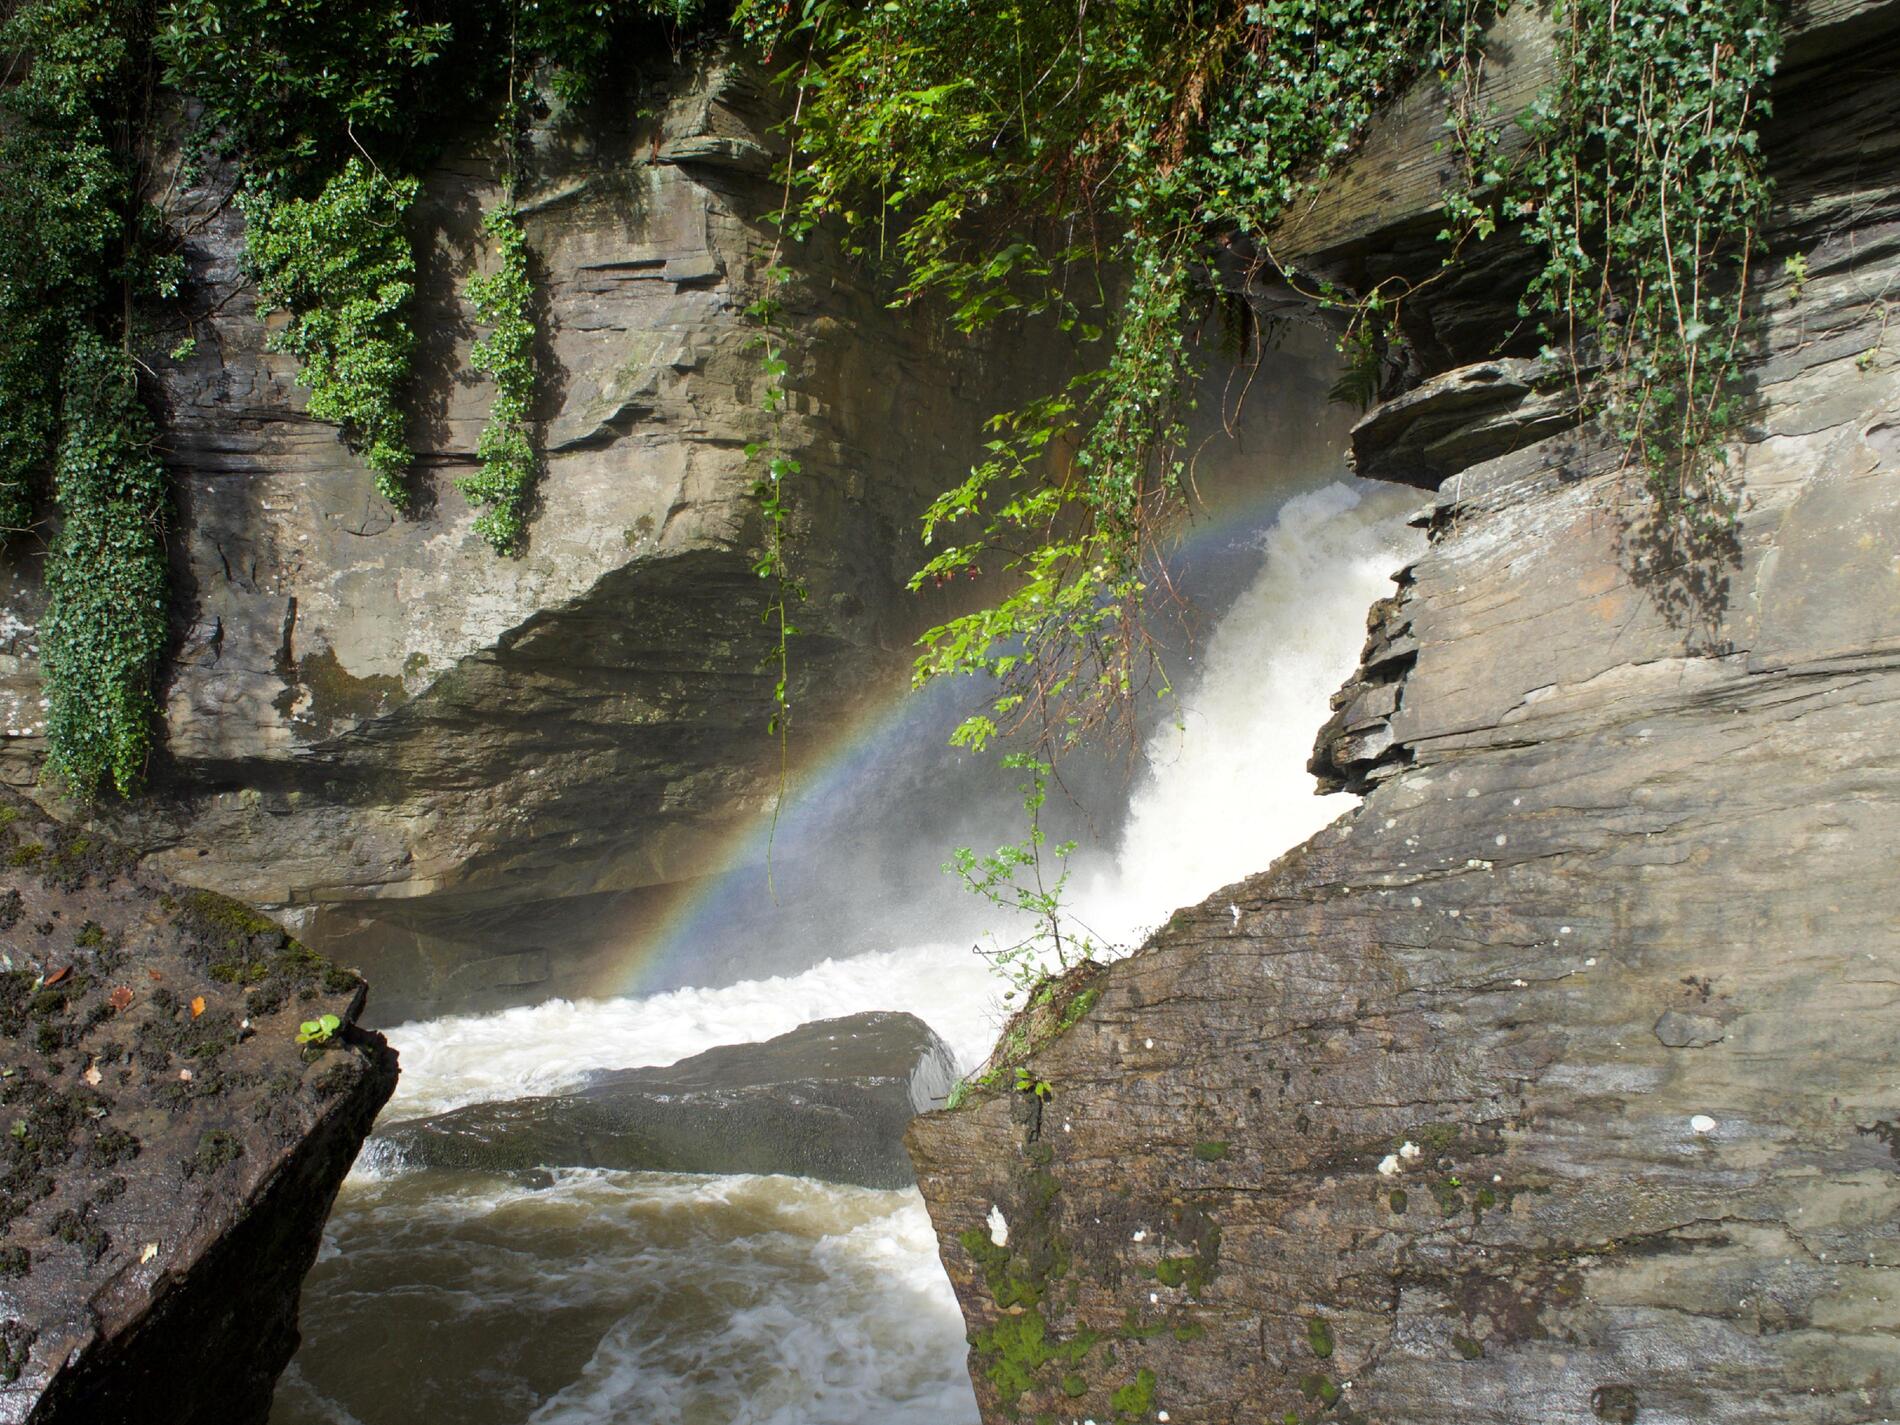 White spray among rocks in the waterfall, with a rainbow between the rocks.